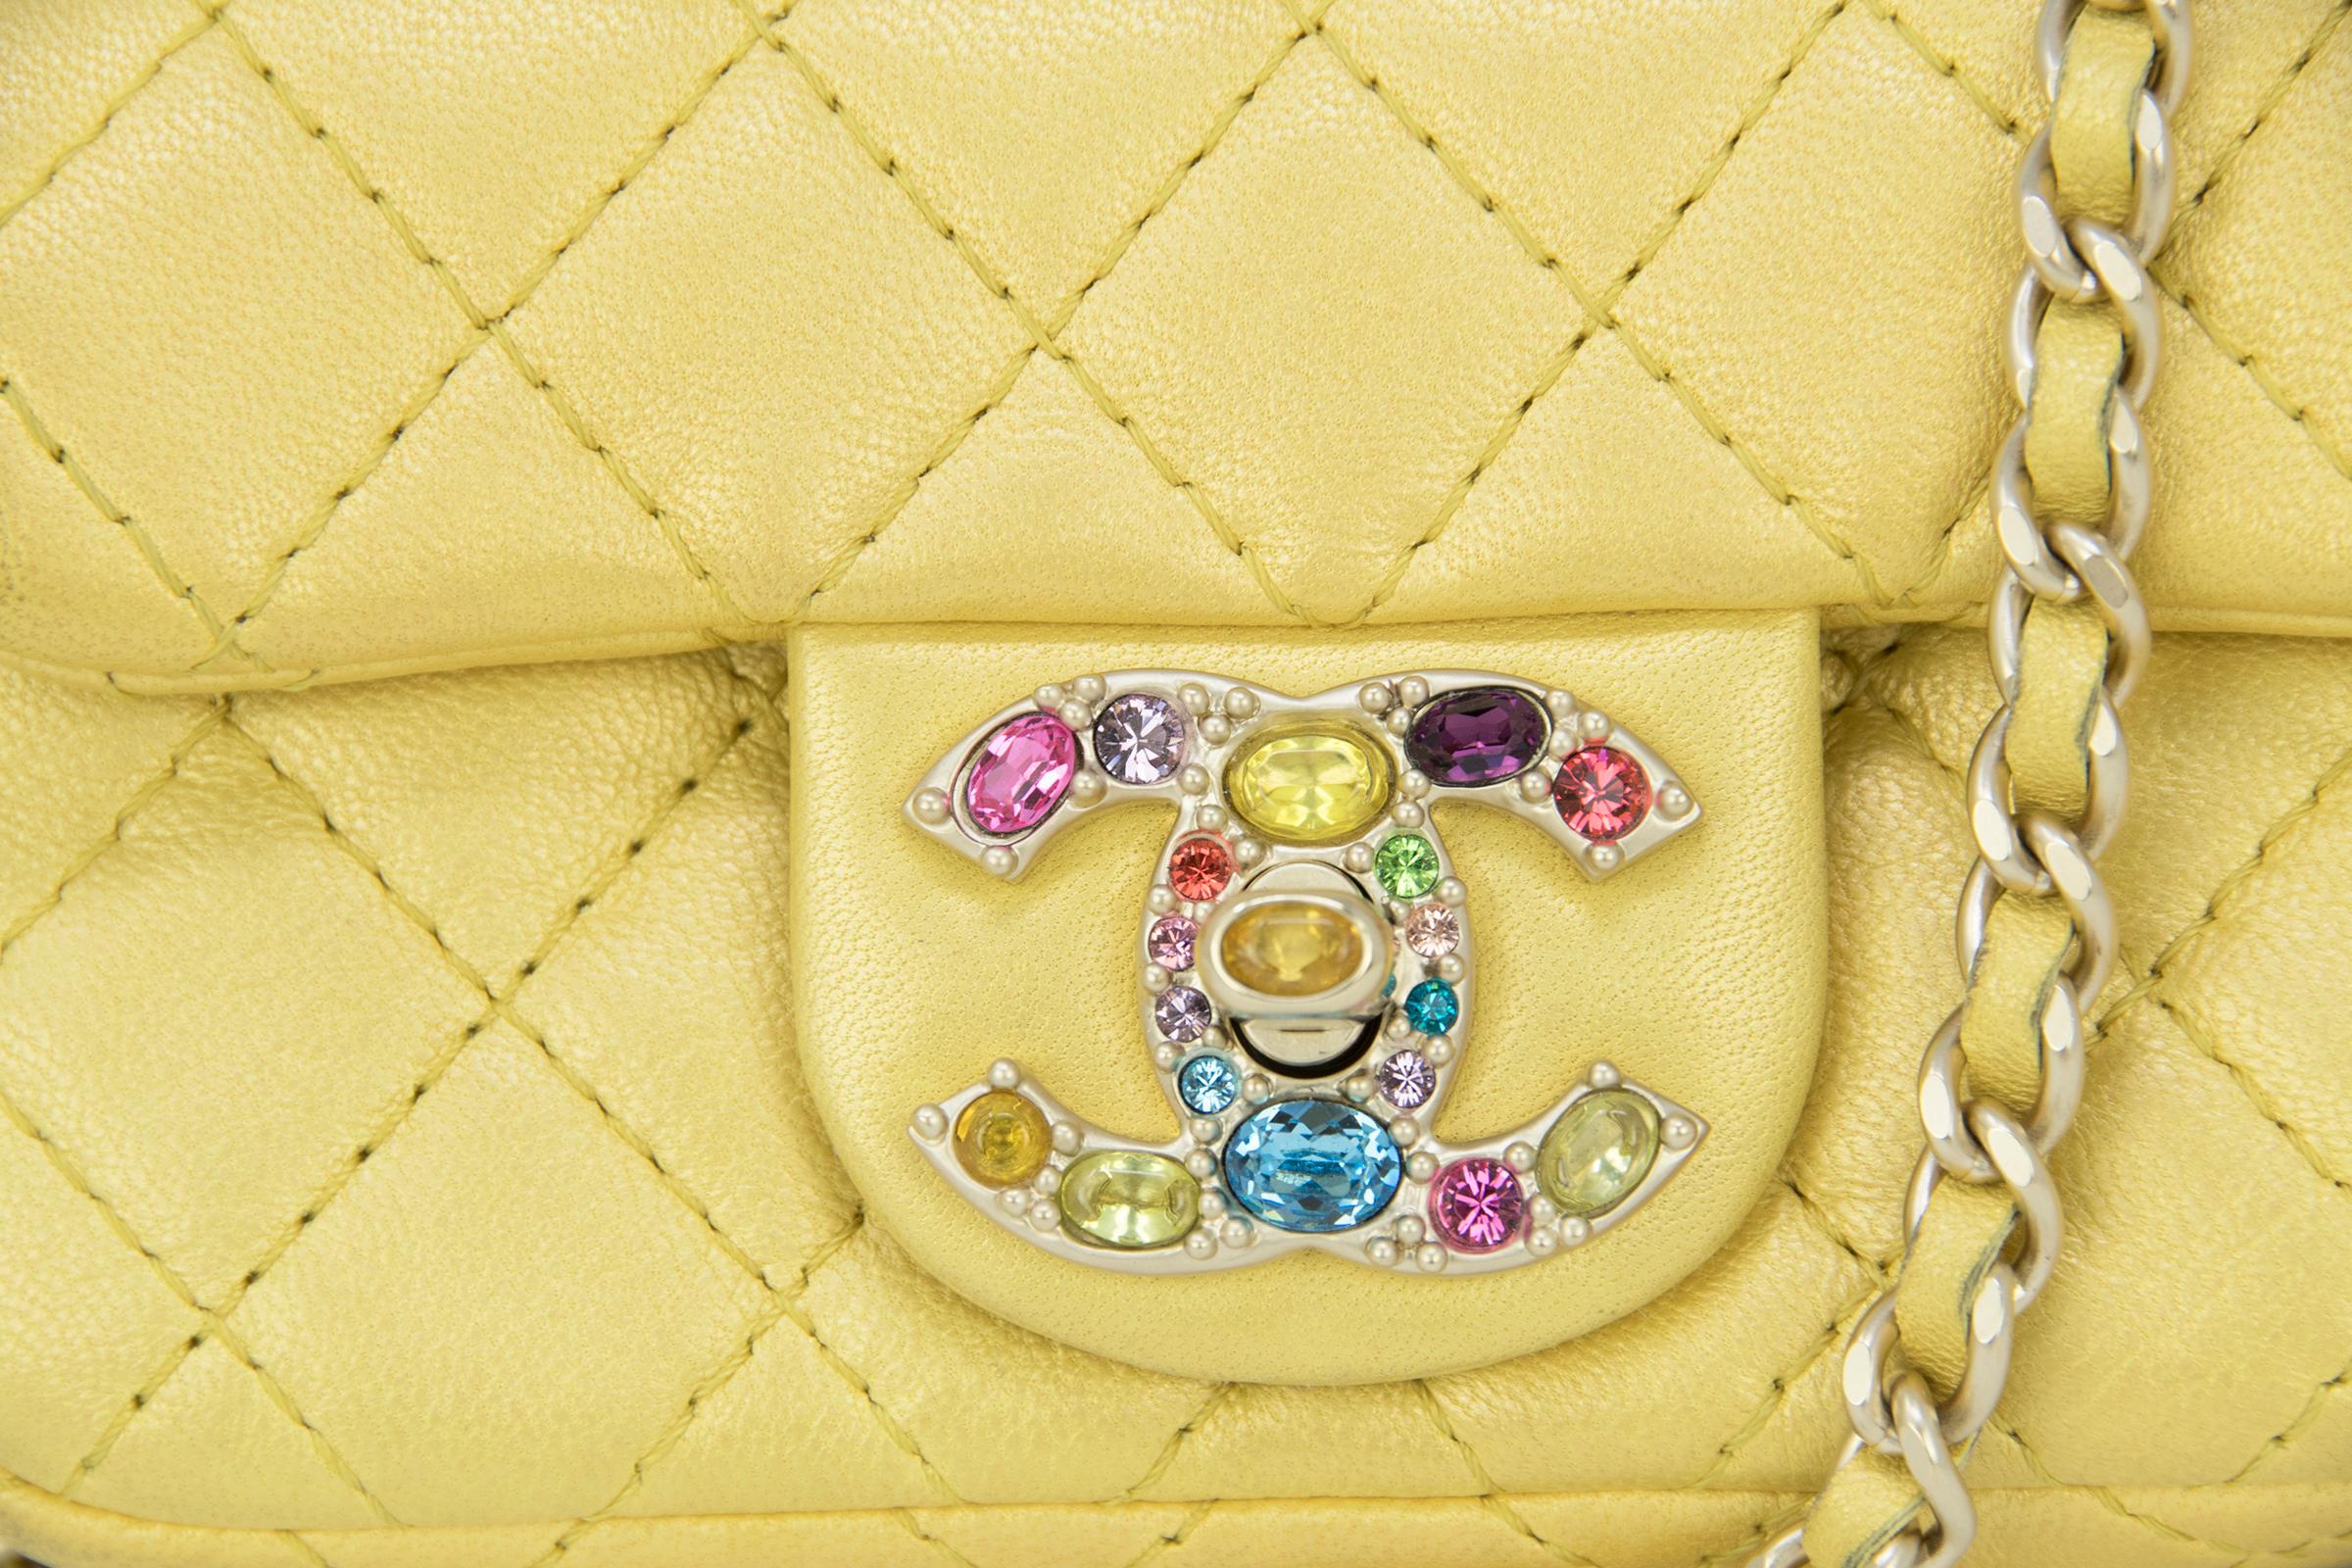 This is an incredible, rare Chanel mini double flap bag.  In a gorgeous shade of yellow with a slight metallic tint, the quilted bag features multicolored rhinestone hardware and a long chain shoulder strap.

Condition: Brand new